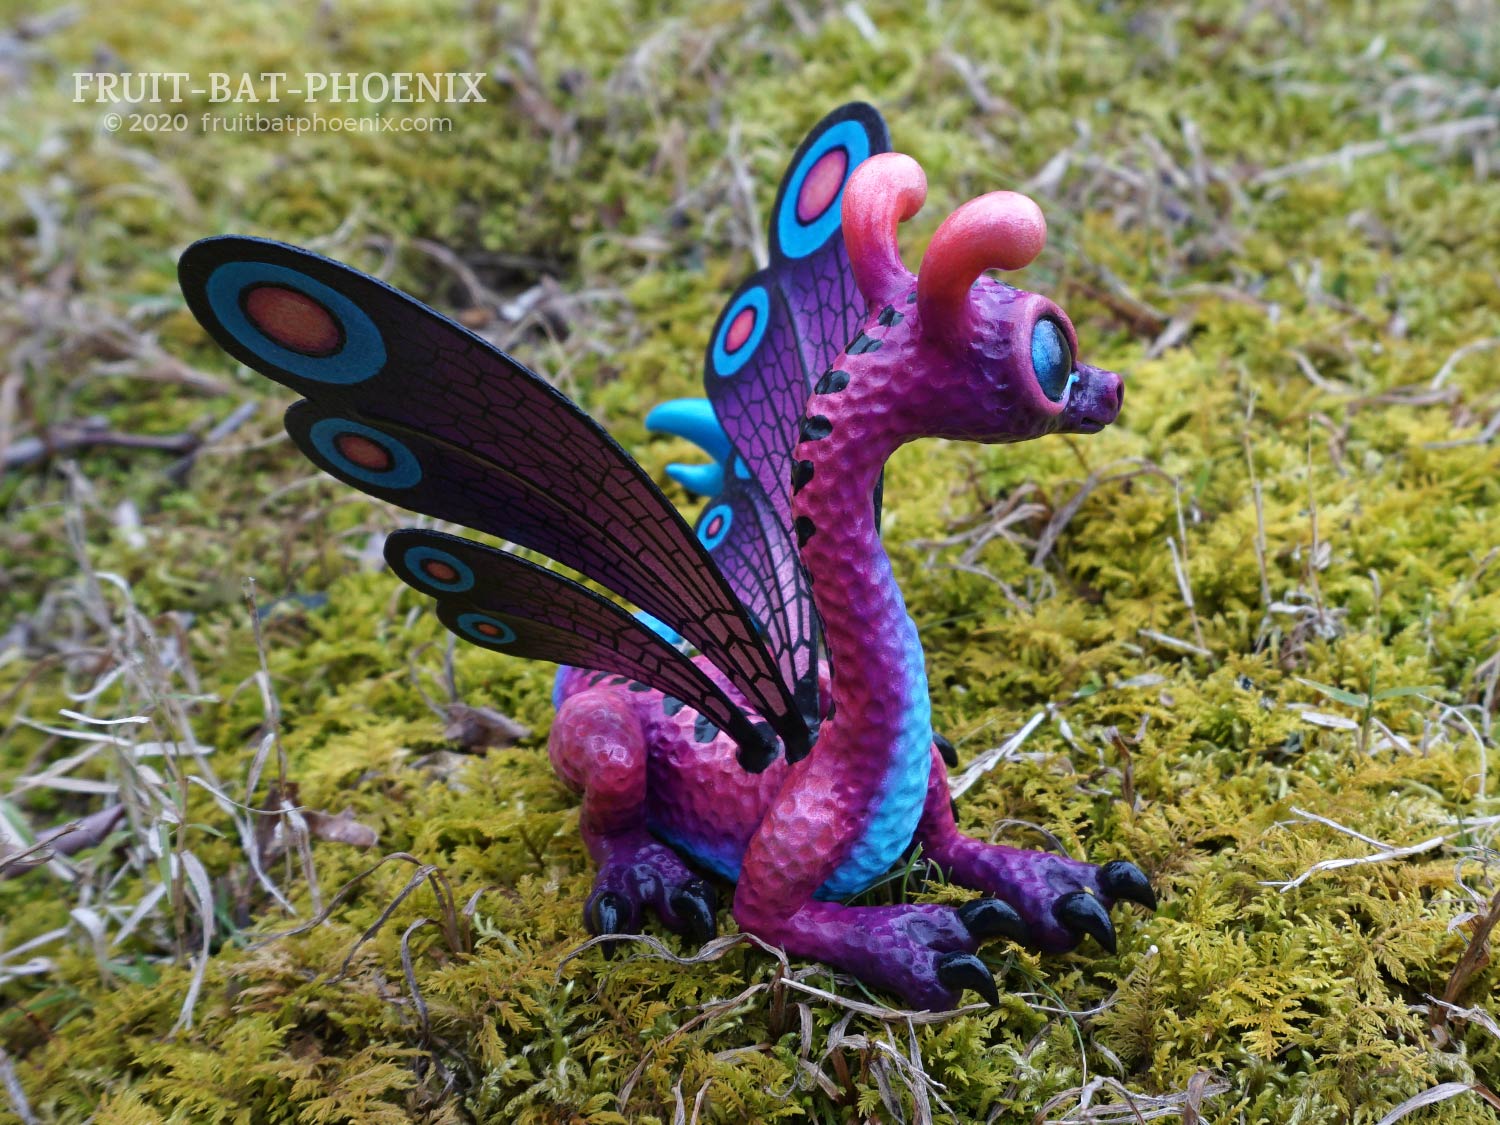 purple and blue dragon sculpture with spotted butterfly wings